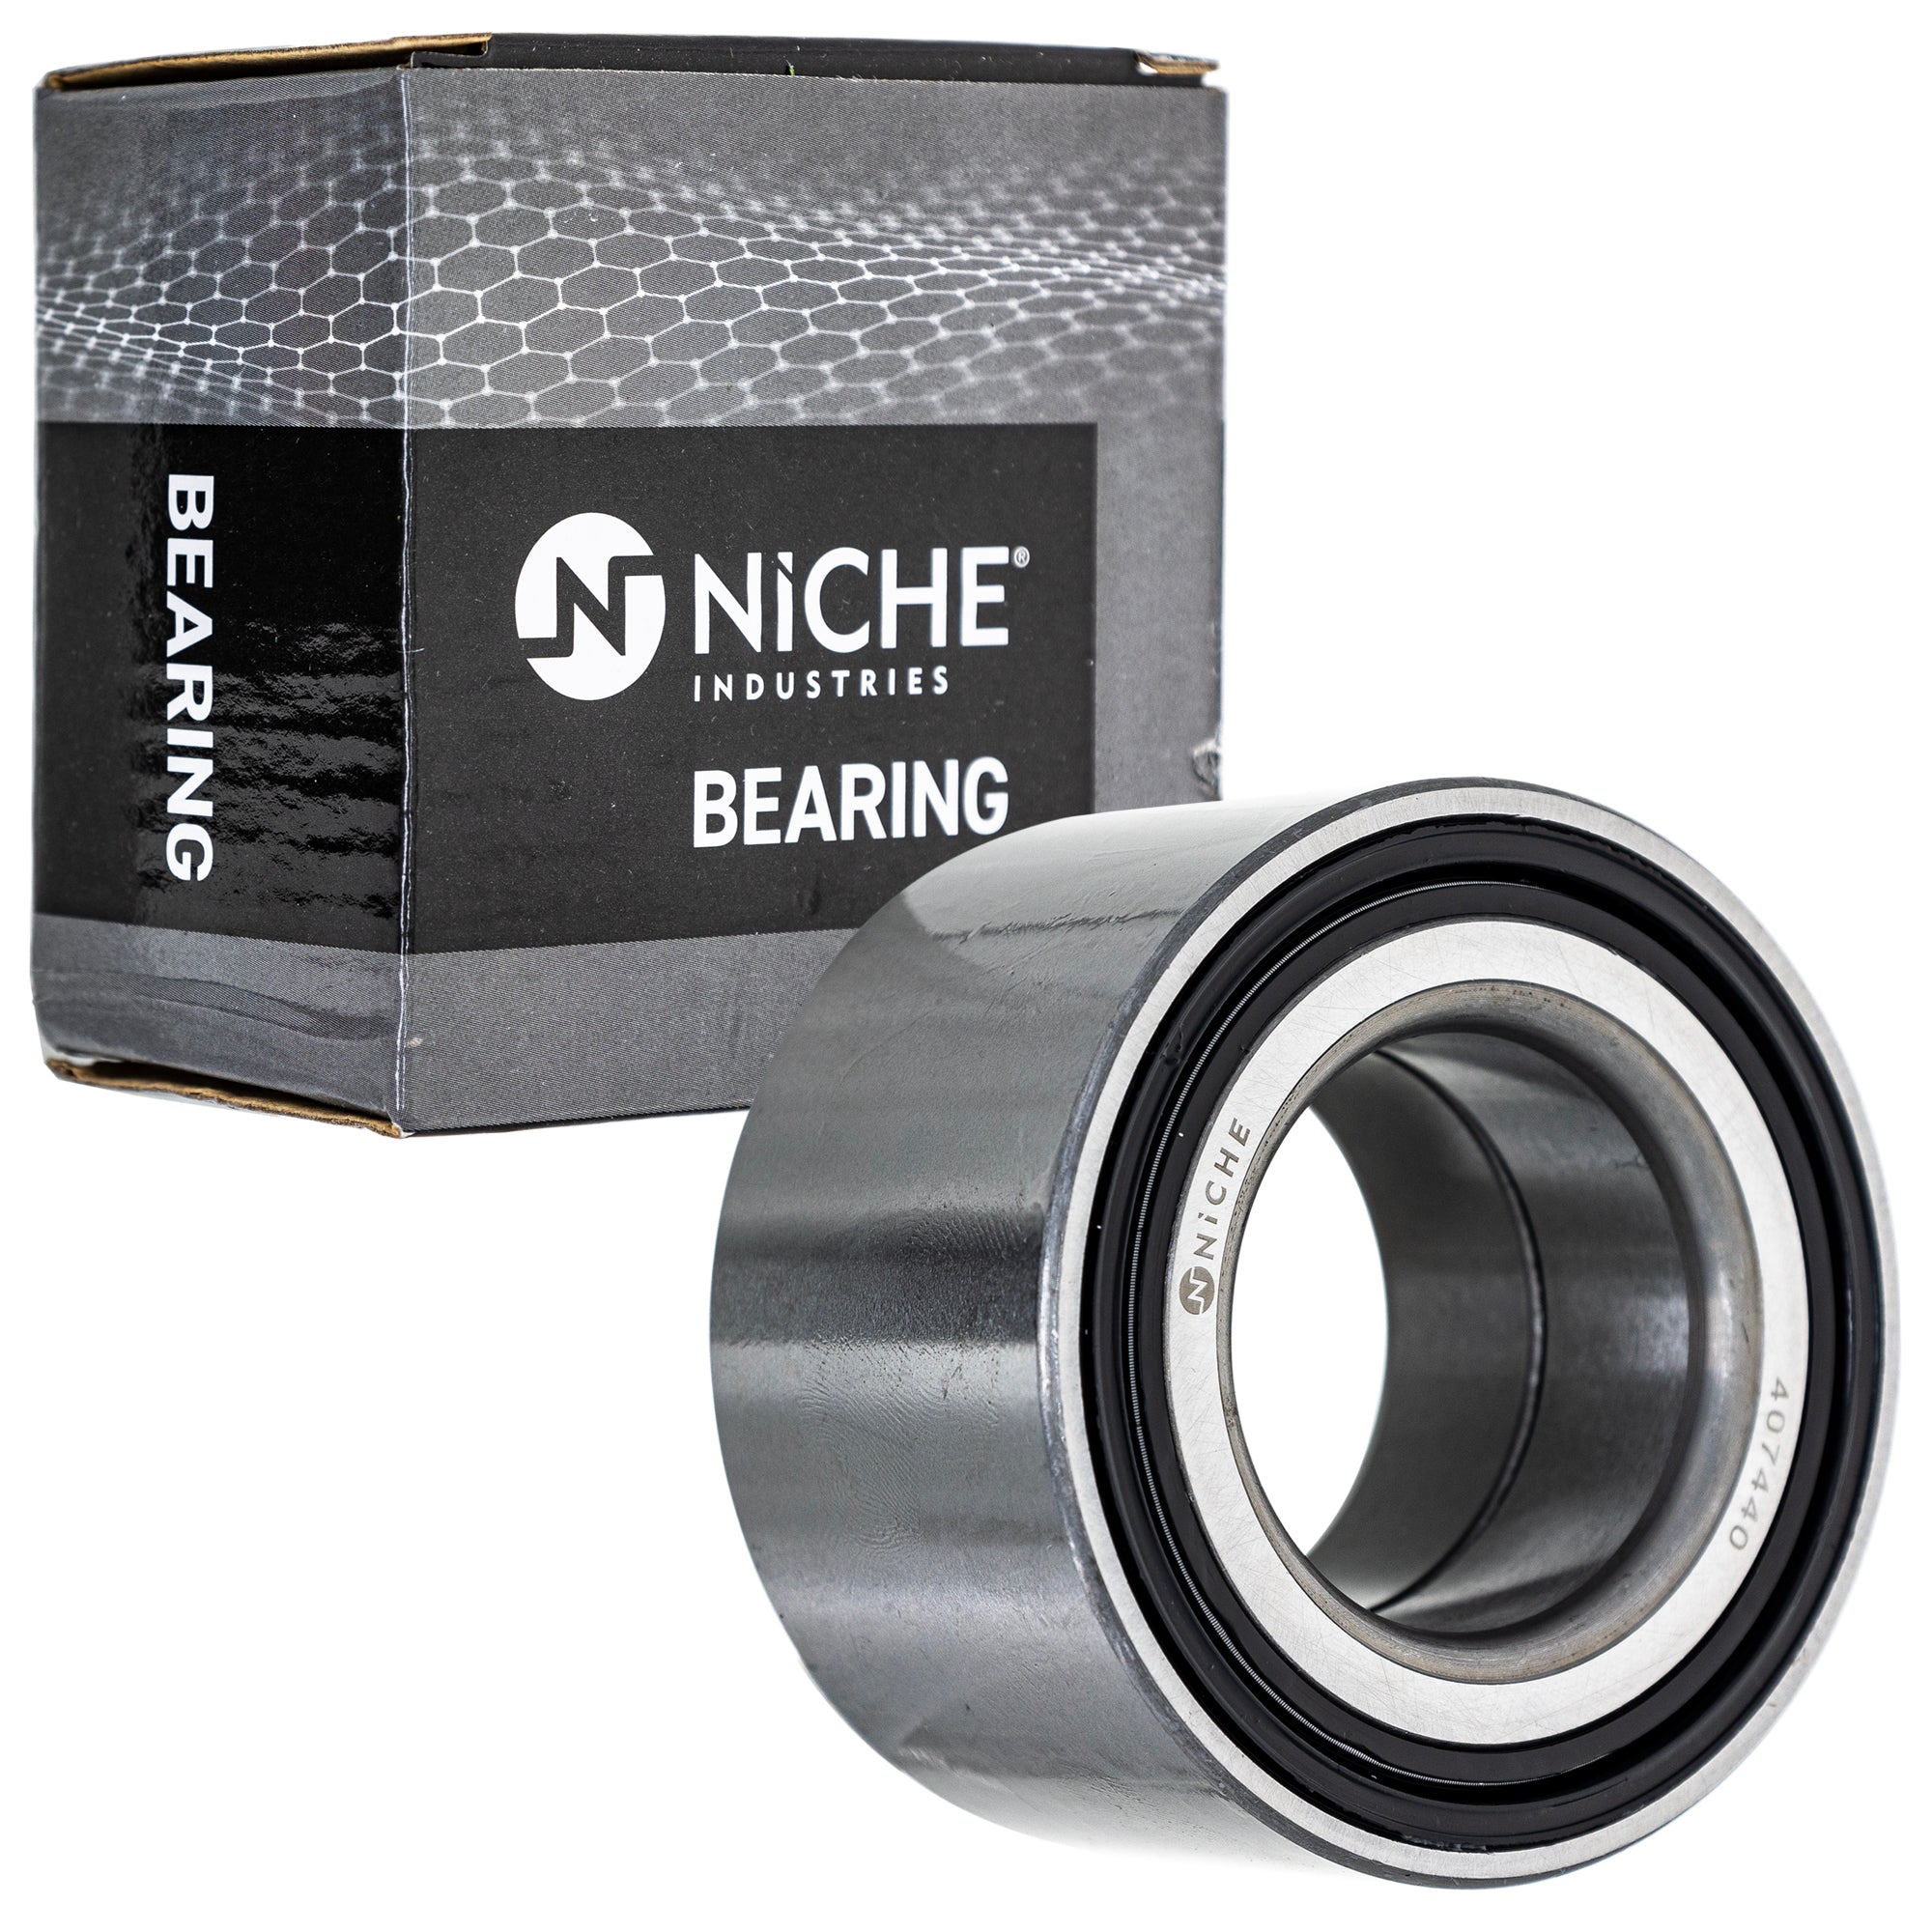 NICHE 519-CBB2259R Bearing 2-Pack for zOTHER GEM Stateline ST1300